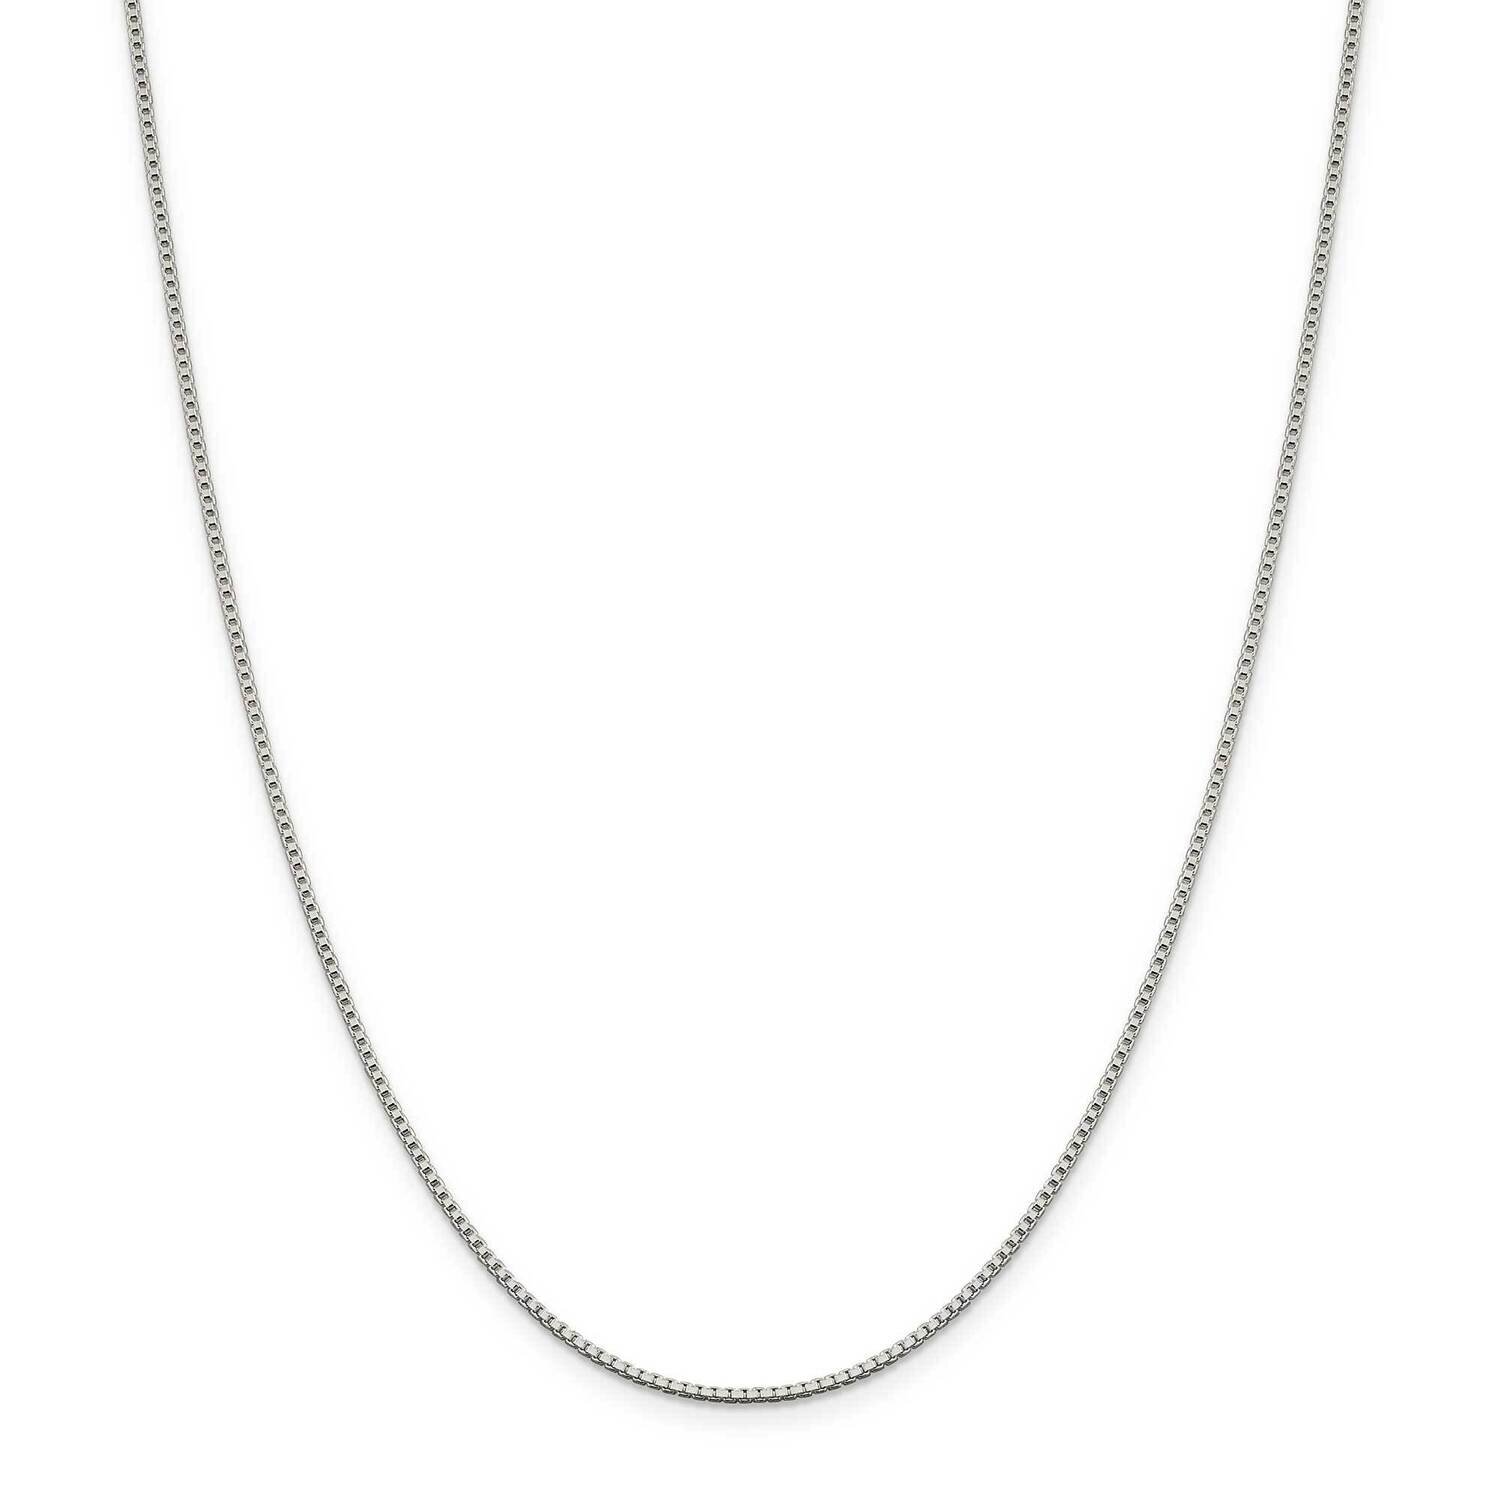 1.4mm Box Chain with 2 Inch Extender 18 Inch Sterling Silver Rhodium-Plated QBX026RH-18